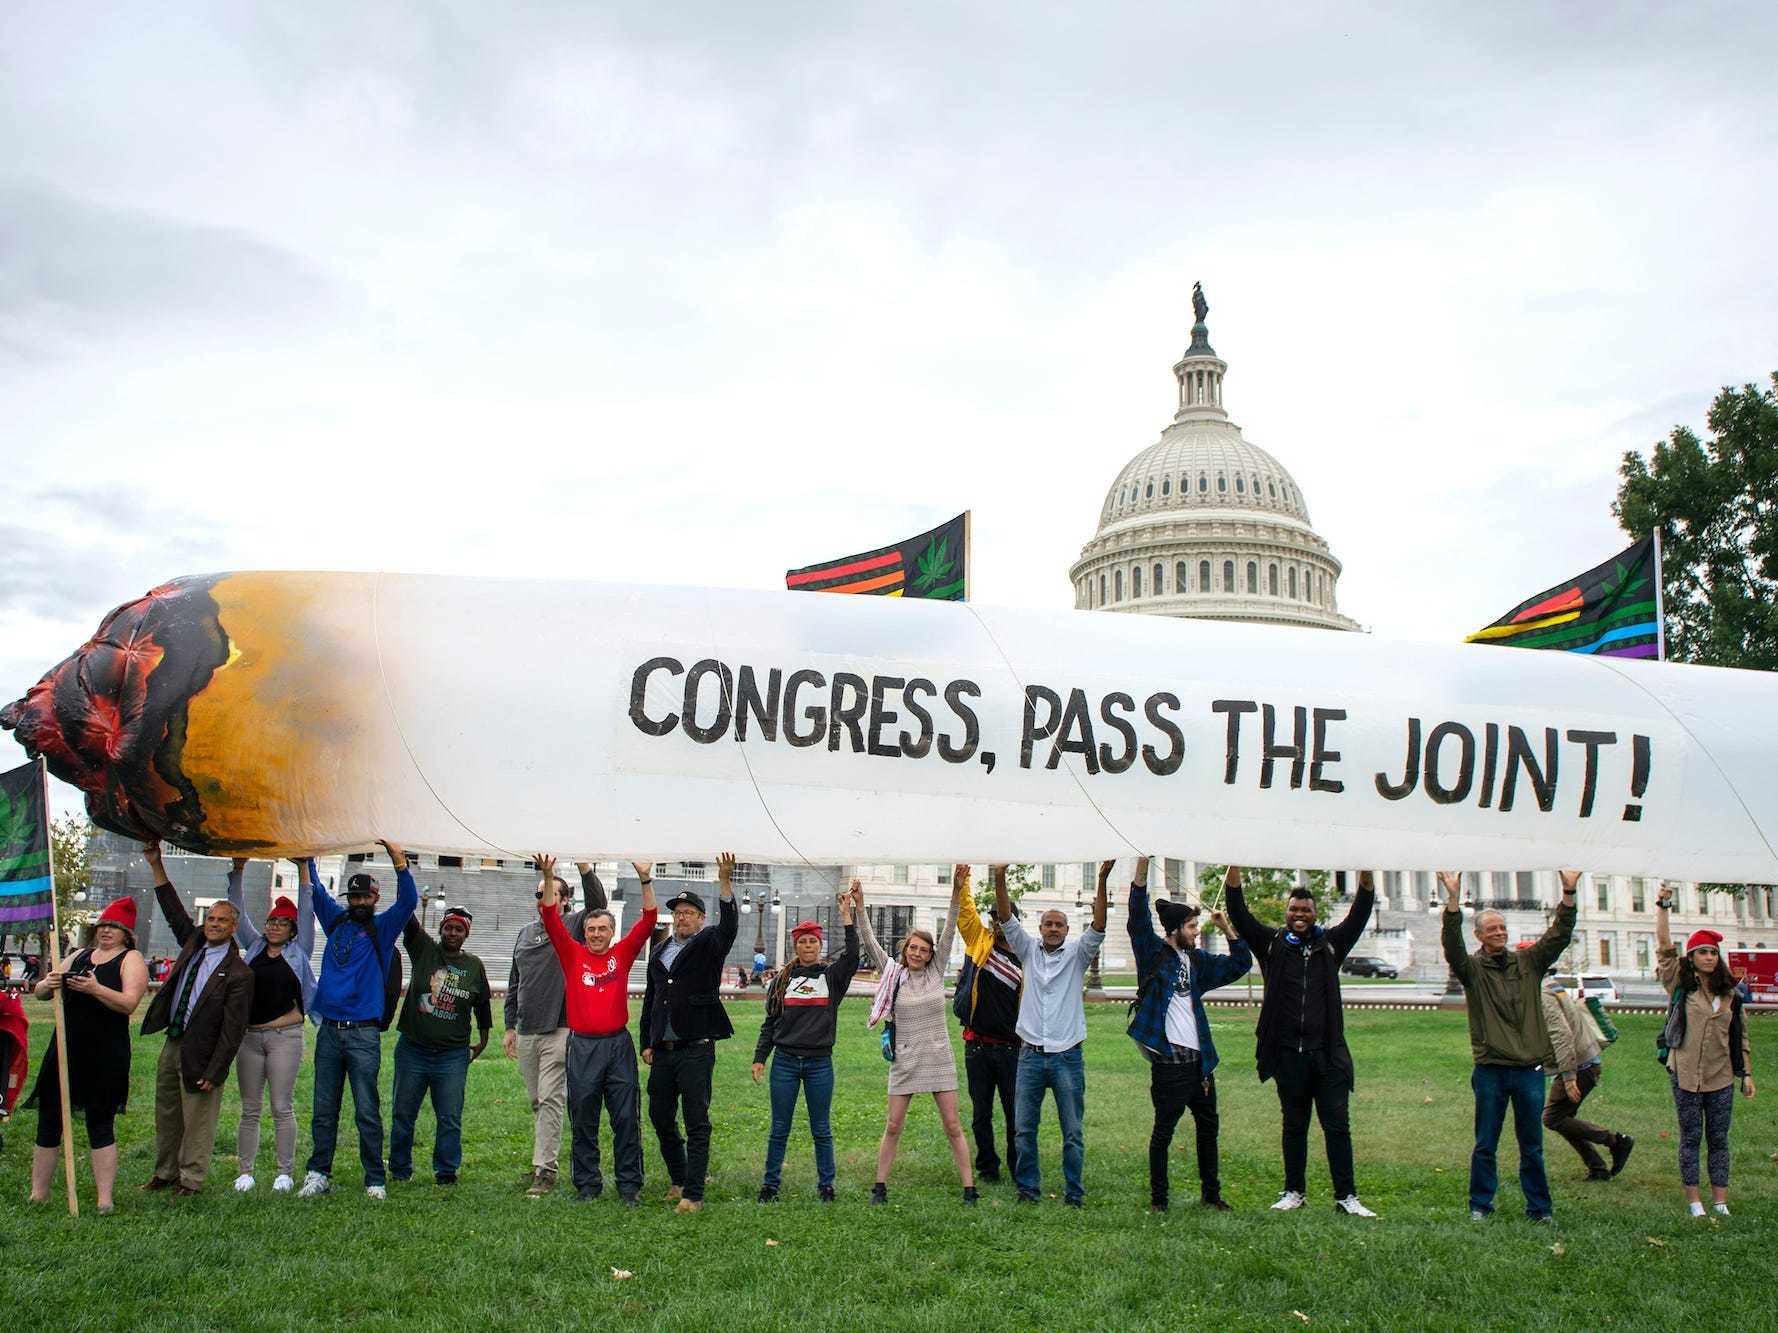 Activists holding up a giant inflatable joint during a rally at the US Capitol.